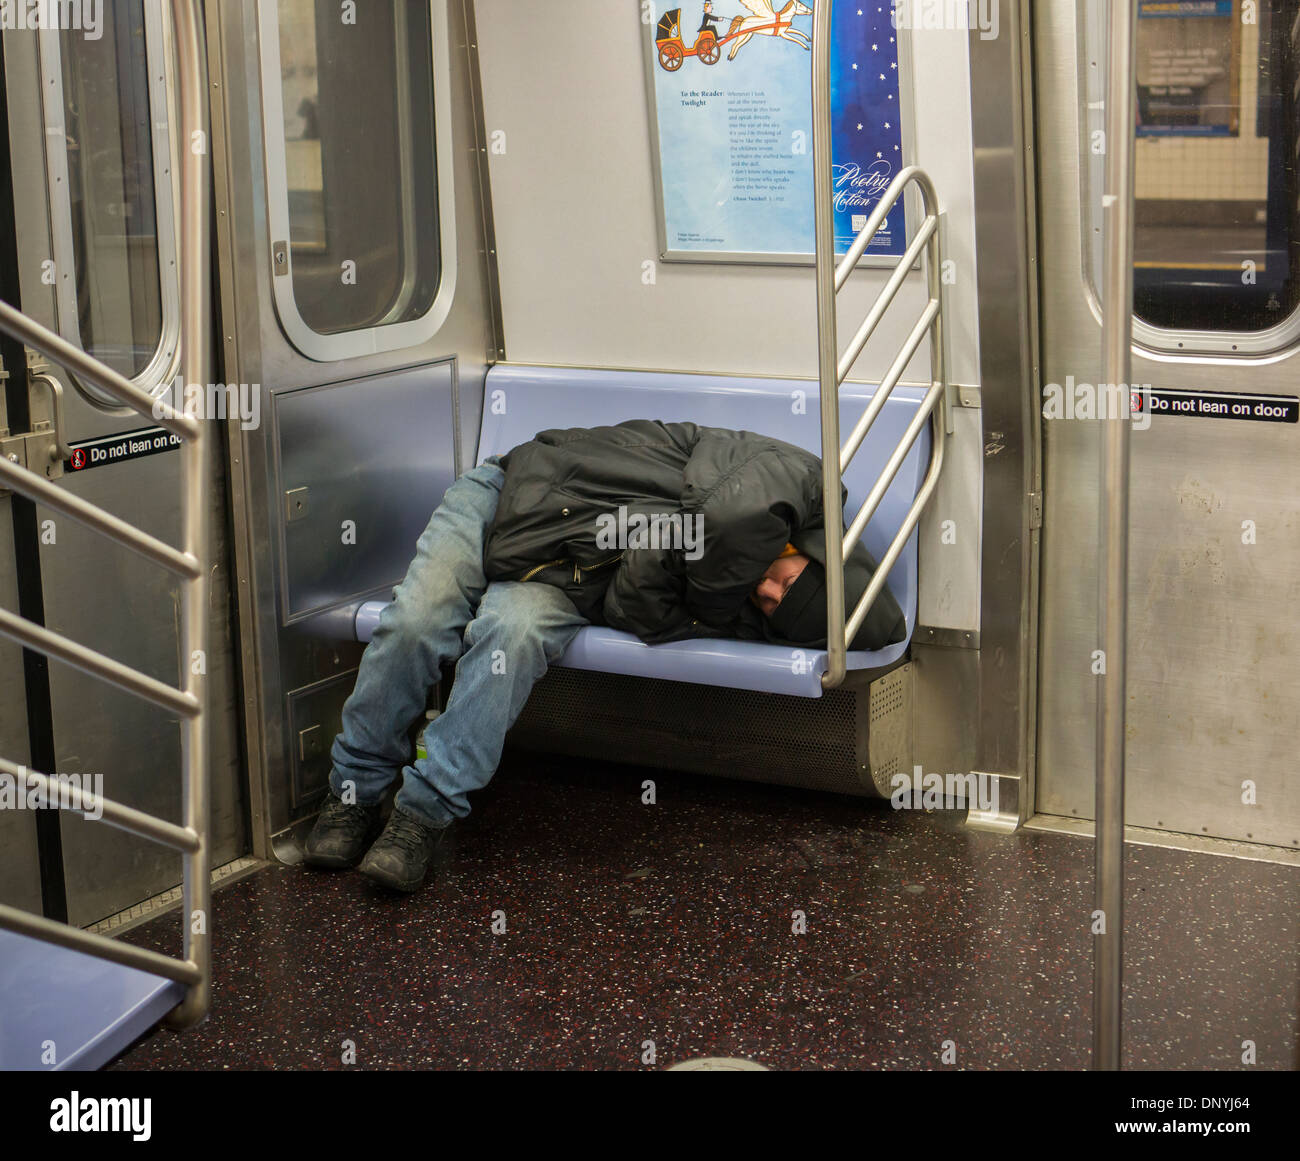 Homeless man takes up several seats as he sleeps in a subway car in New York on Monday, January 6, 2014. (© Richard B. Levine) Stock Photo